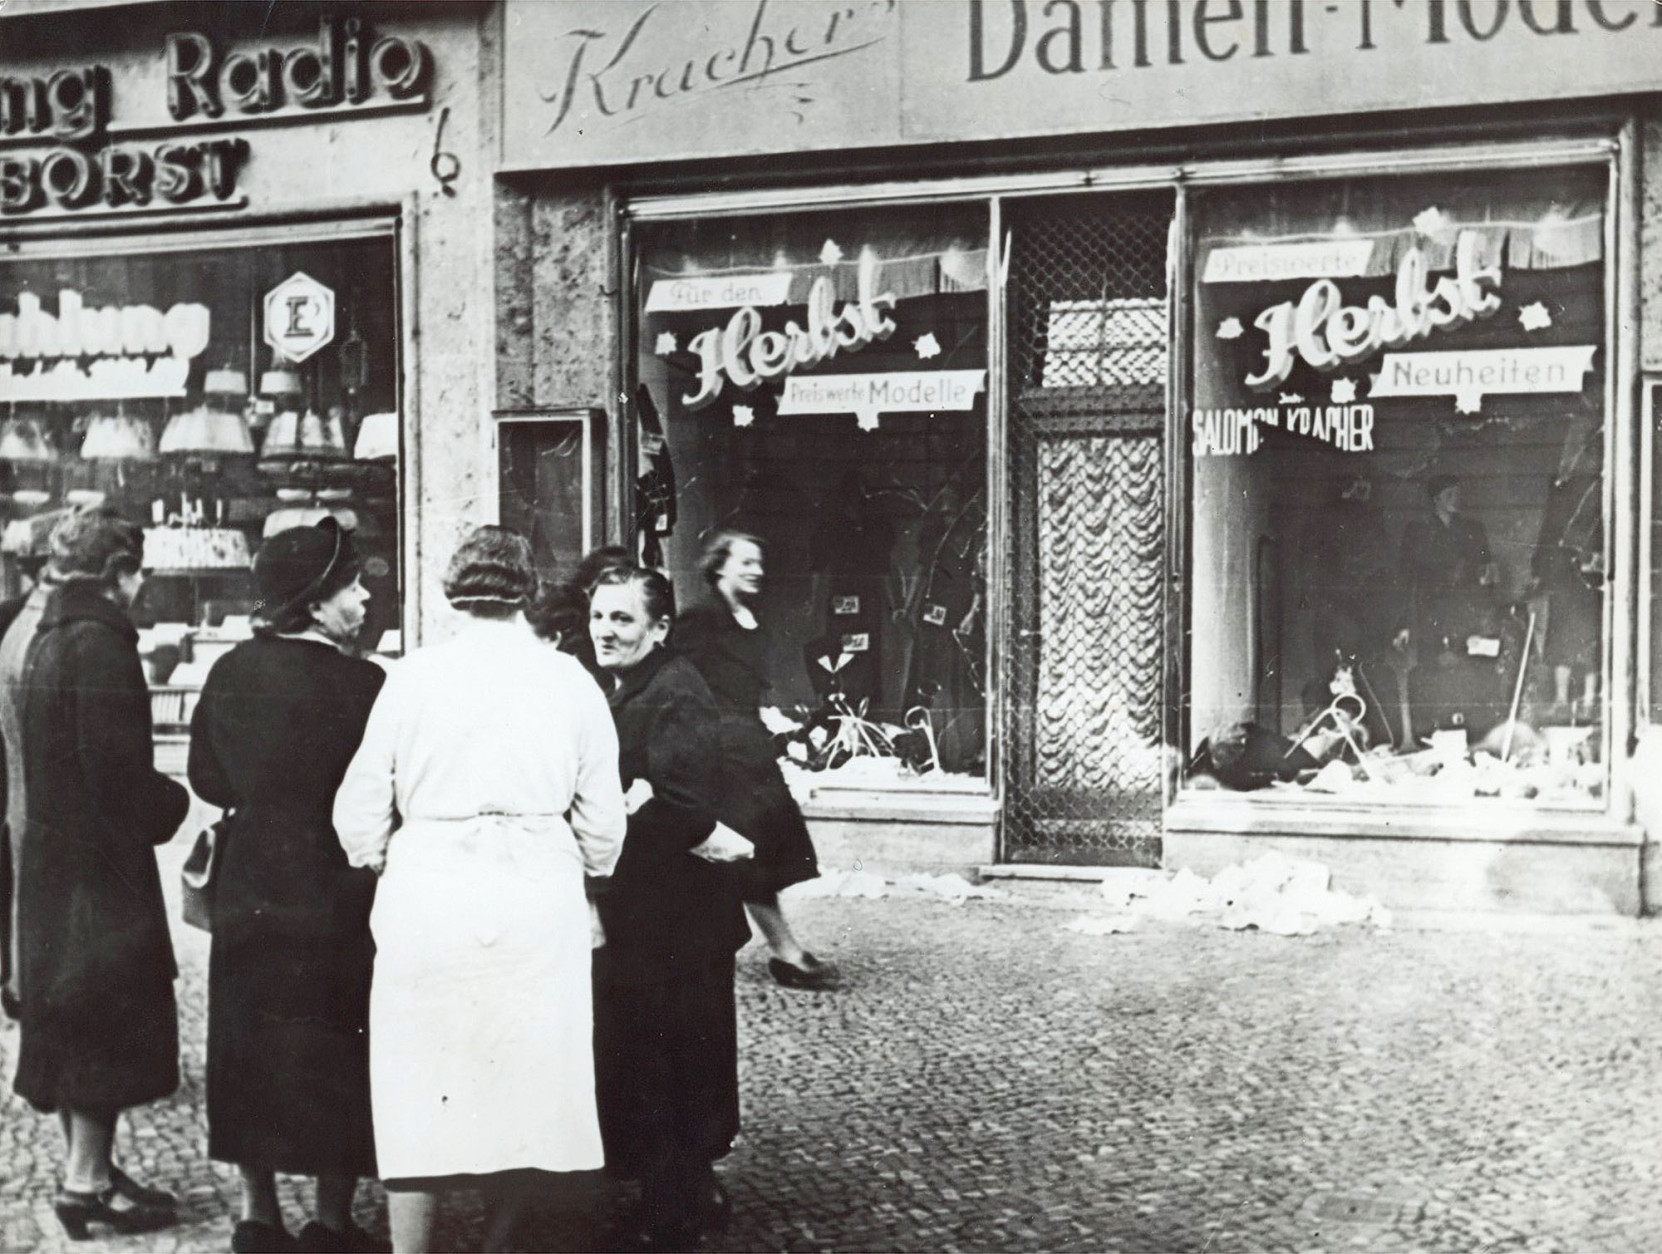 A group of people stand outside a Jewish-owned shop in an unnamed German town in November 1938, after the Kristallnacht, when Nazis thugs burned and plundered hundreds of Jewish homes, shops and synagogues across the country. November 9th is regarded a historic faithful day in Germany as on the same day in 1918 monarchy in Germany was overthrown, in 1939 it heralded the Holocaust and in 1989 it marked the fall of the Berlin Wall which resulted in the German reunification after 28 years of division. (AP Photos)